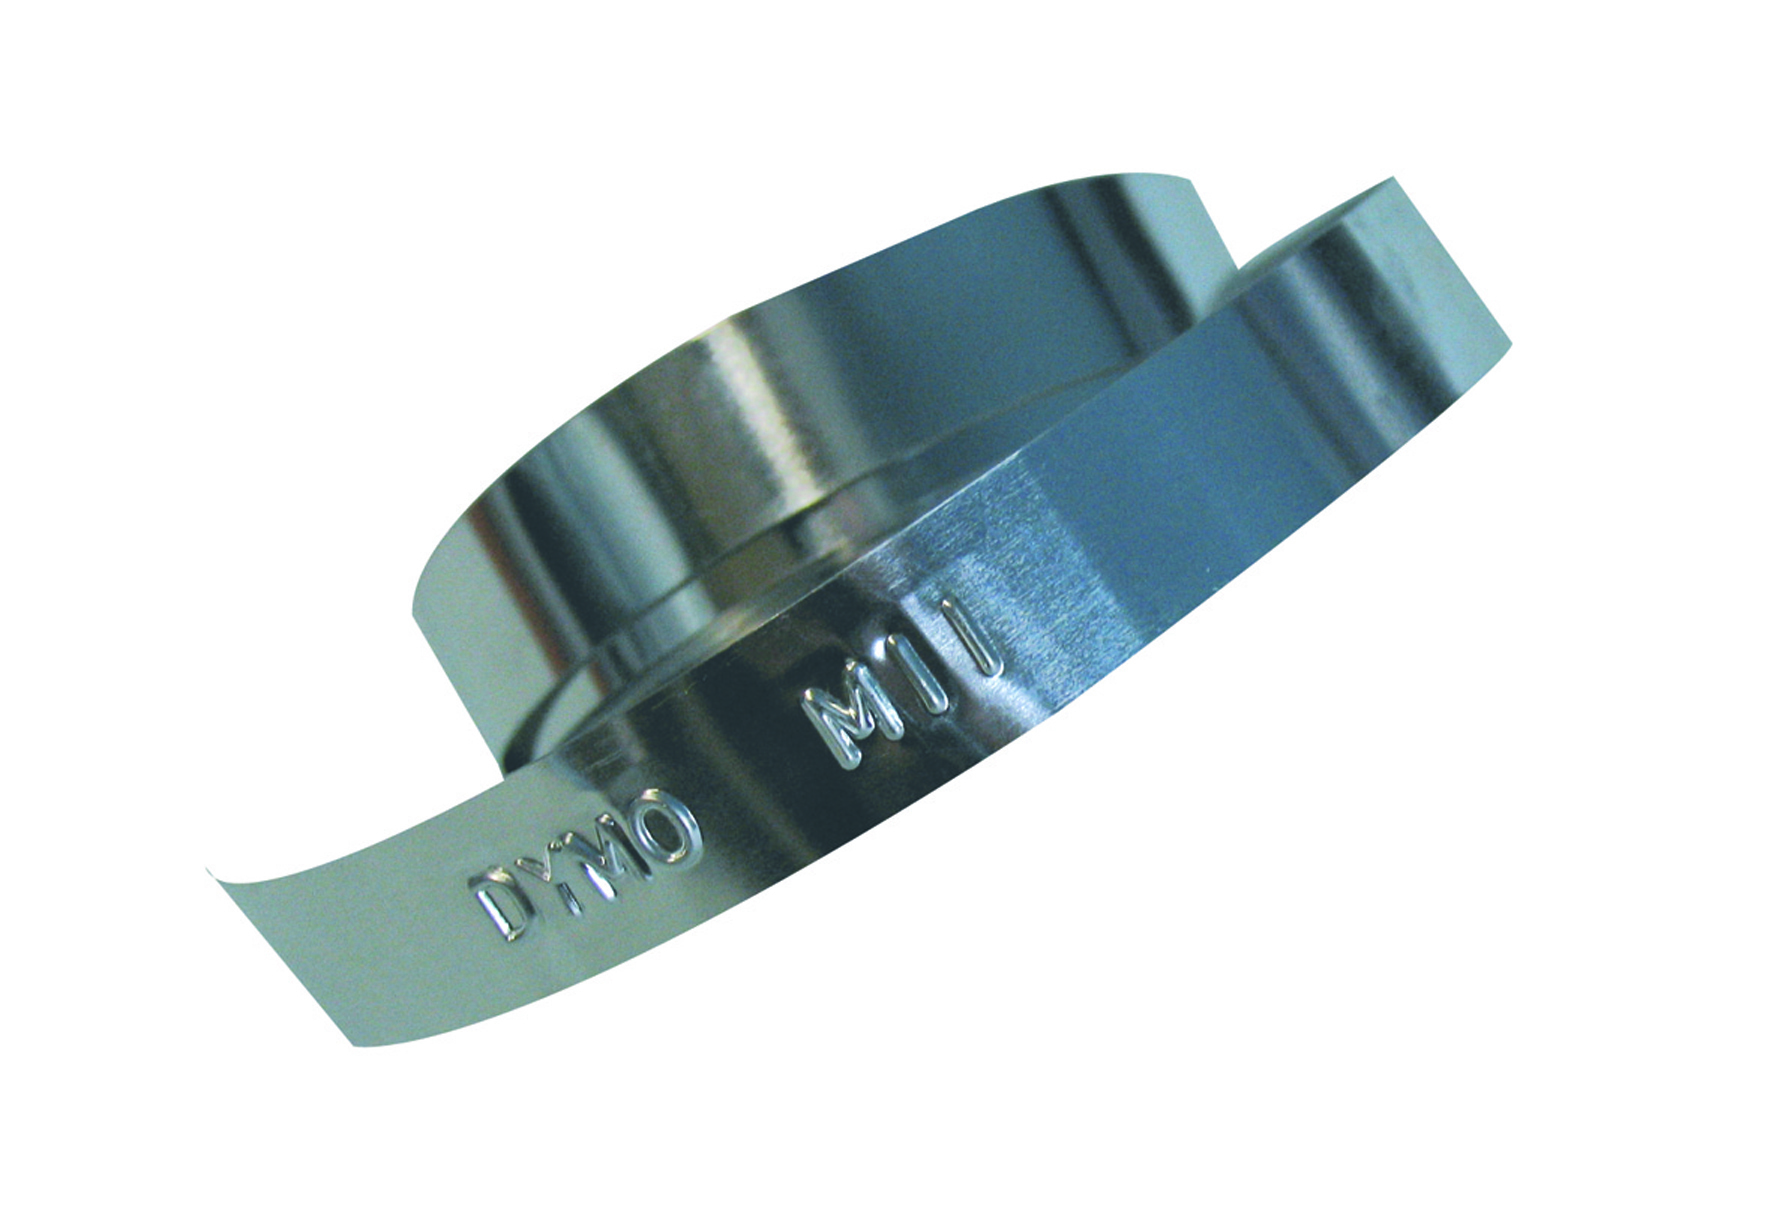 DYMO 12mm Non Adhesive Stainless Steel Tape